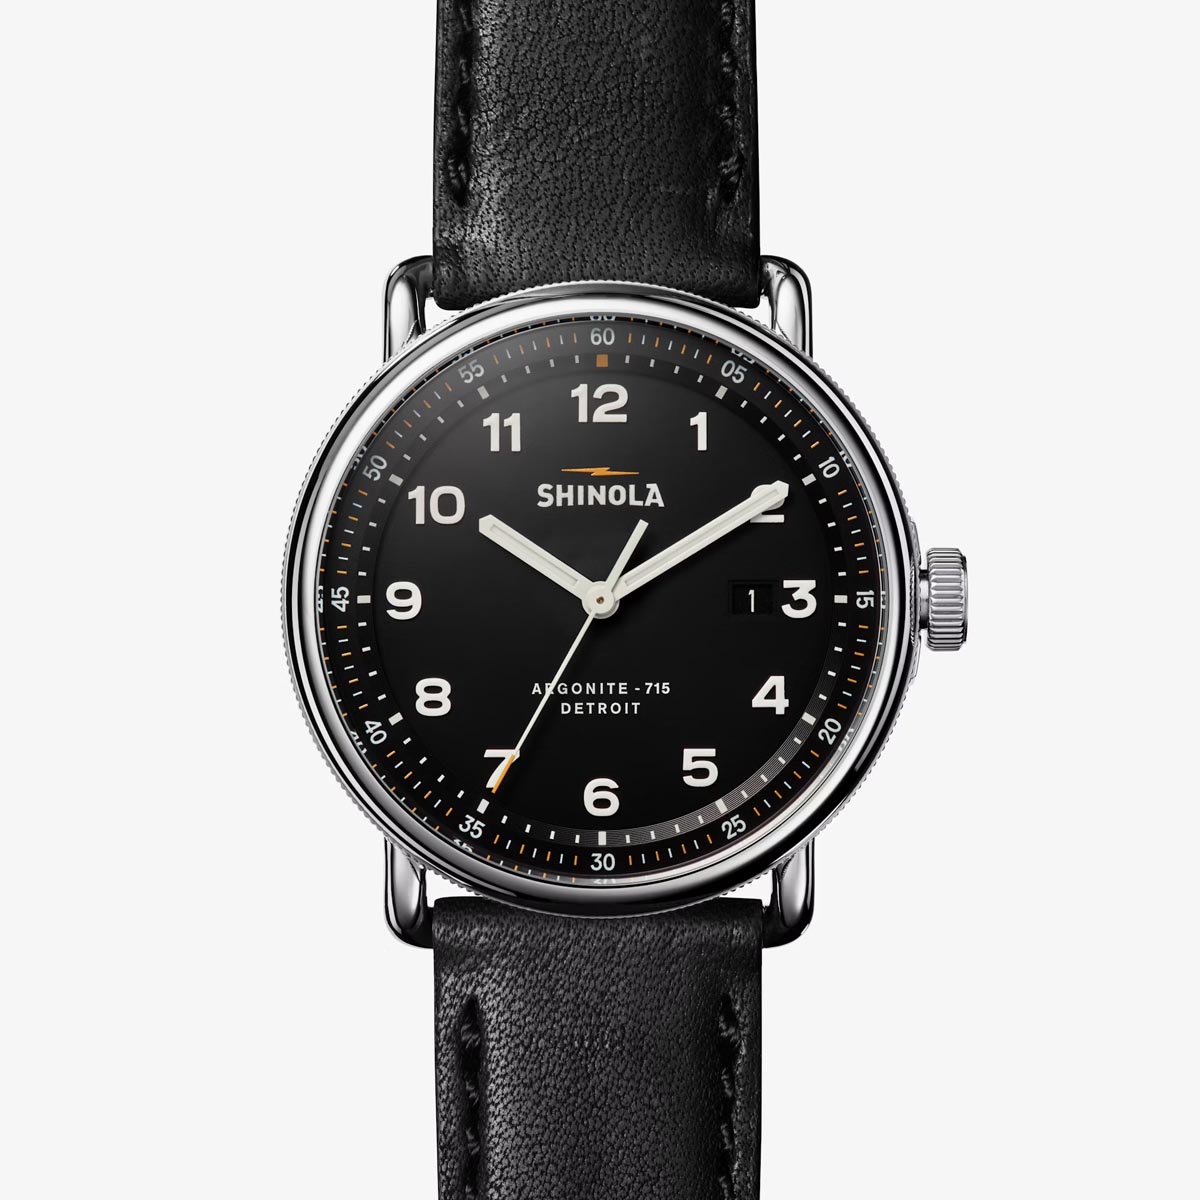 Shinola Canfield Model C Mens Watch with Black Dial and Black Leather Strap (quartz movement)